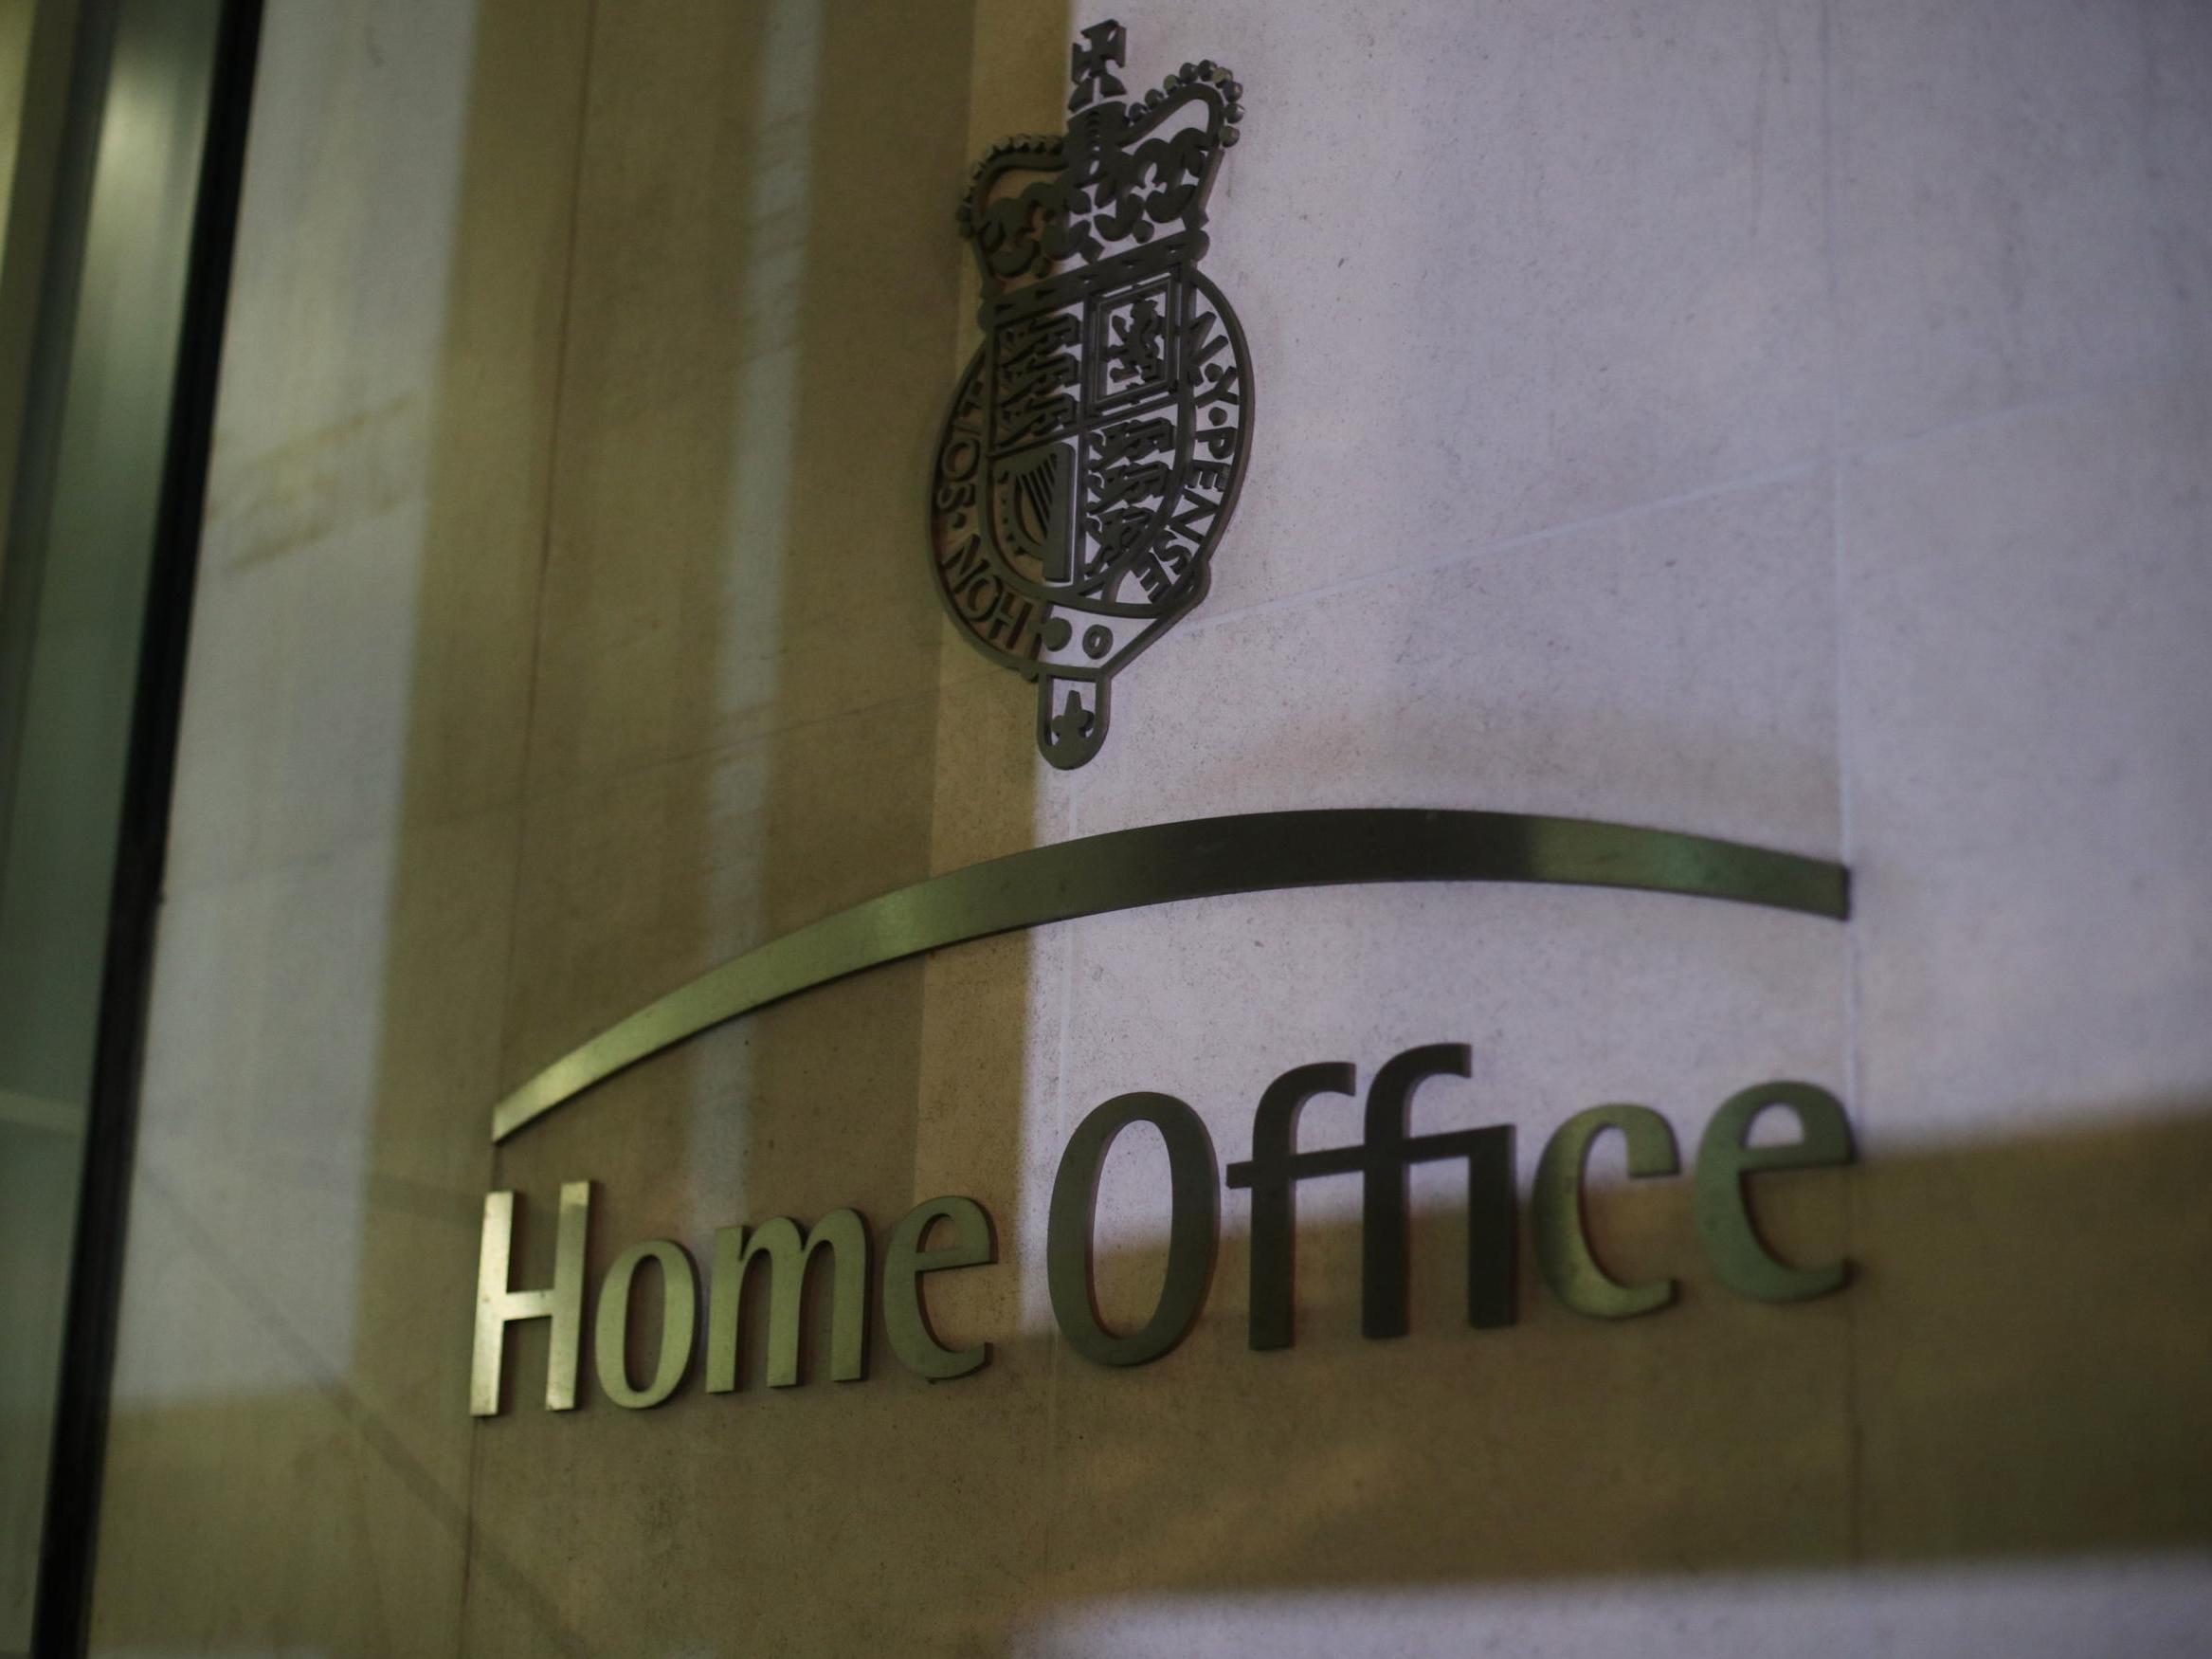 Solicitors raise concerns that the Home Office is regularly requiring its lawyers to defend poor quality decisions in cases where applicants should have been granted protection at an earlier stage